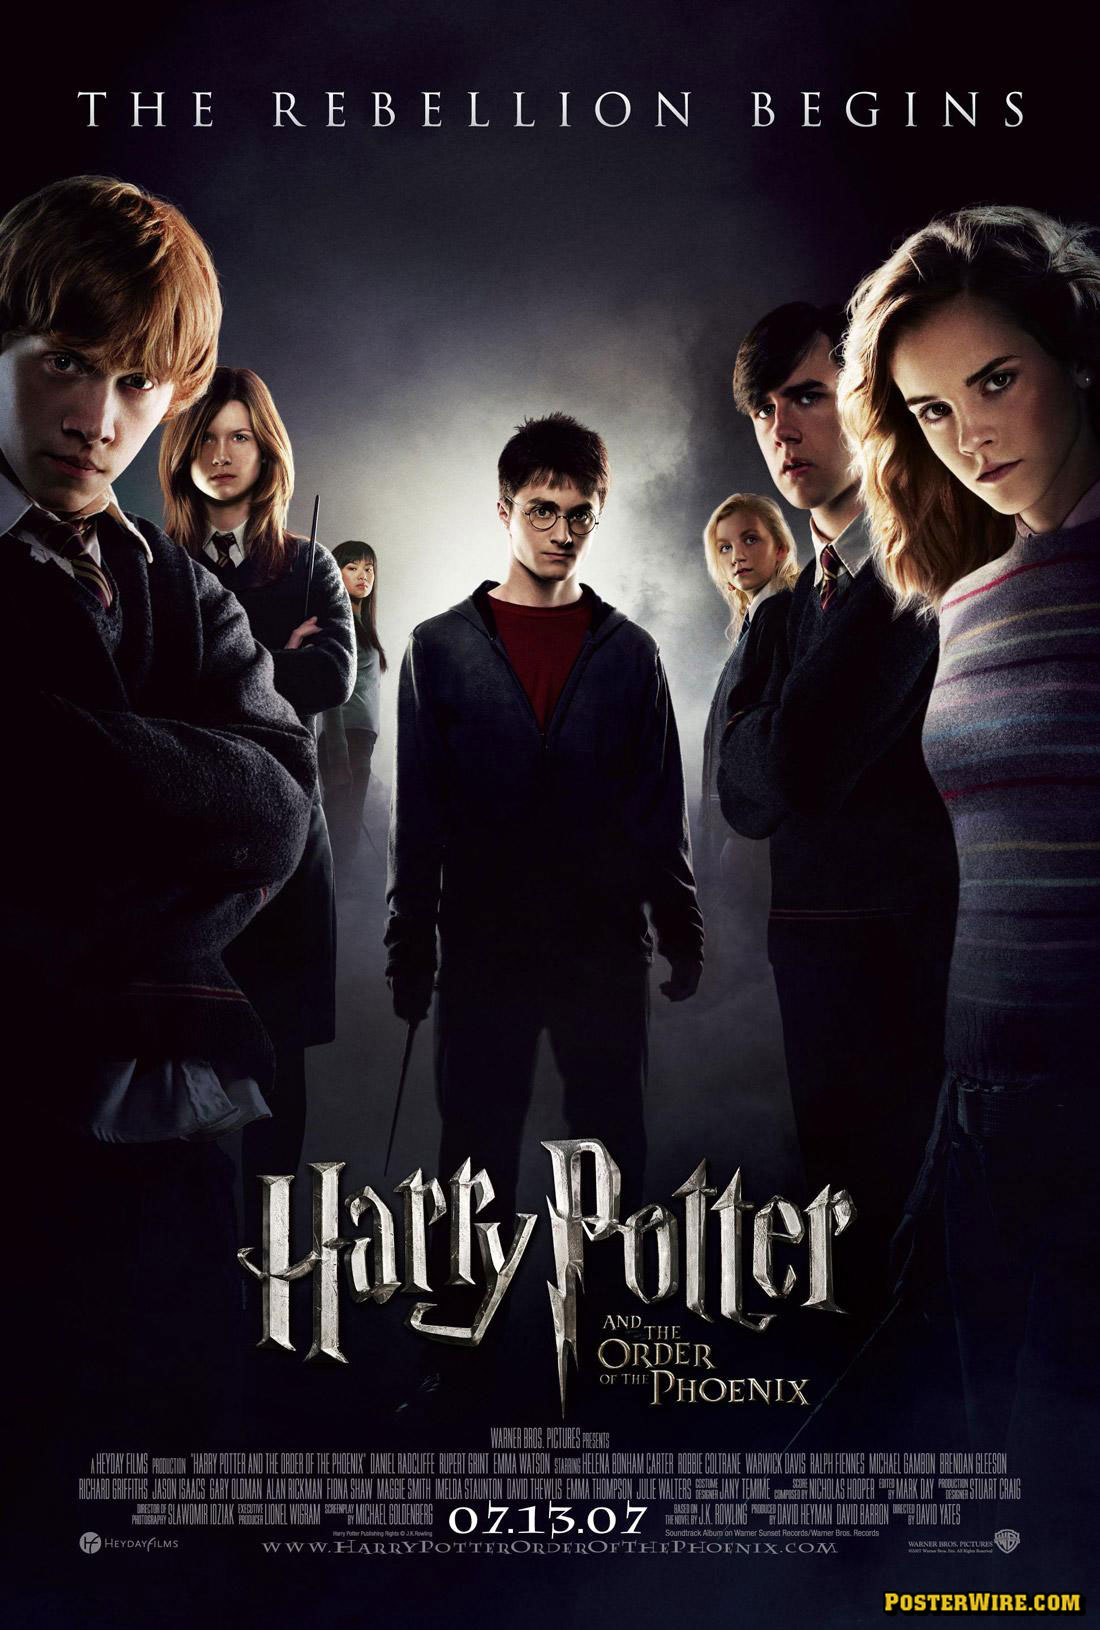 Harry Potter and the Order of the Phoenix movie poster